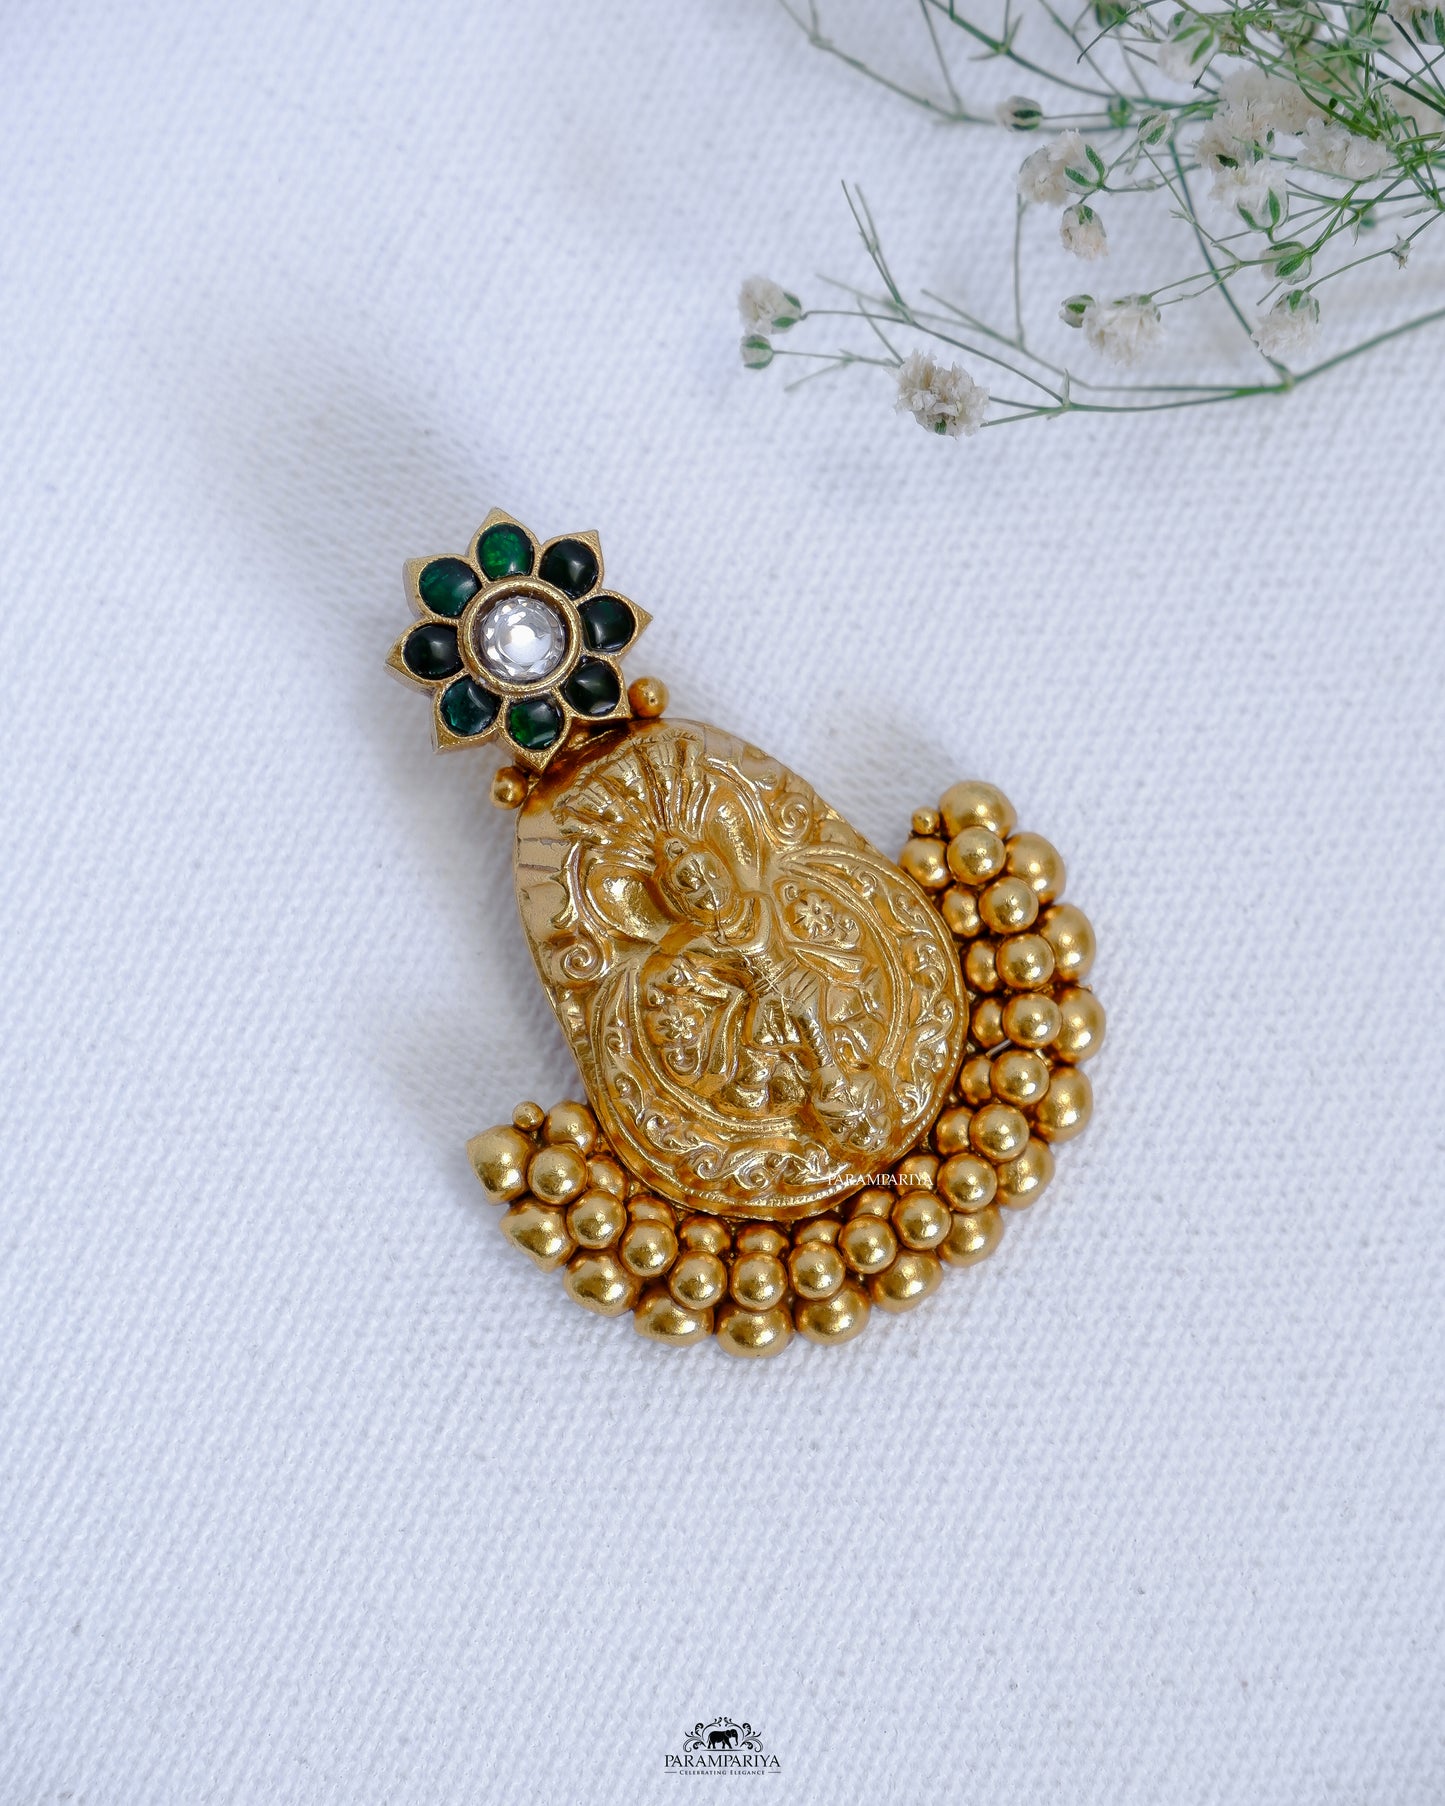  This pendant features an intricate vintage-style design in gold micron-plated pure silver with kundan stones for a timeless, luxurious look. The precise detailing ensures long-lasting quality and beauty.